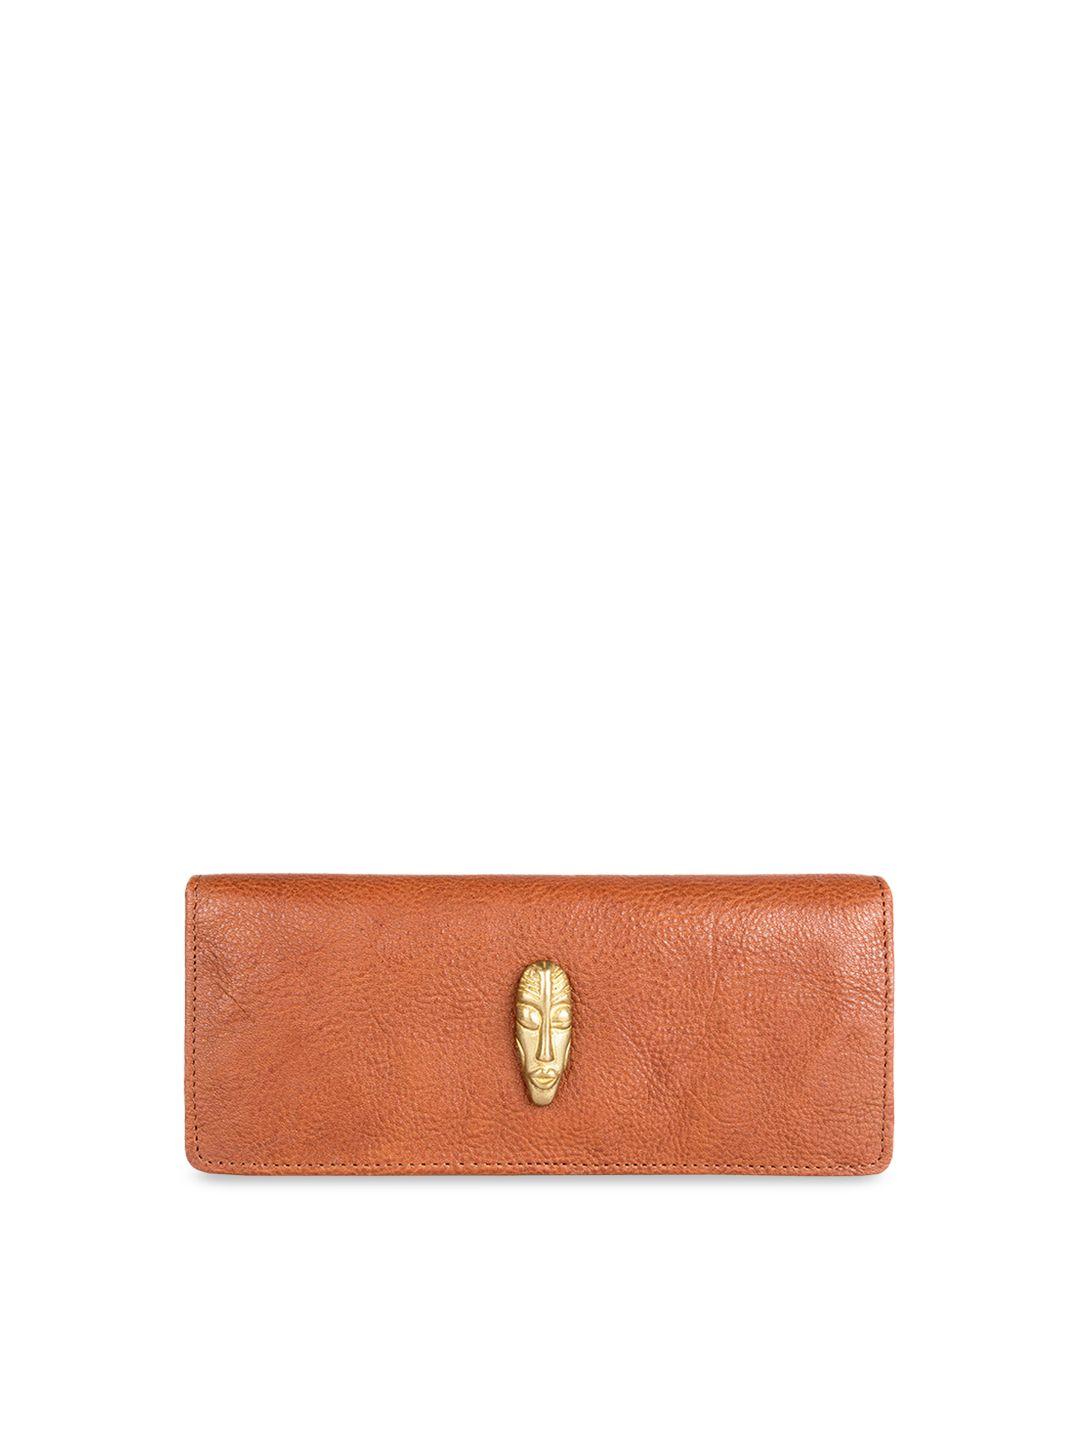 hidesign women tan brown solid leather two fold wallet